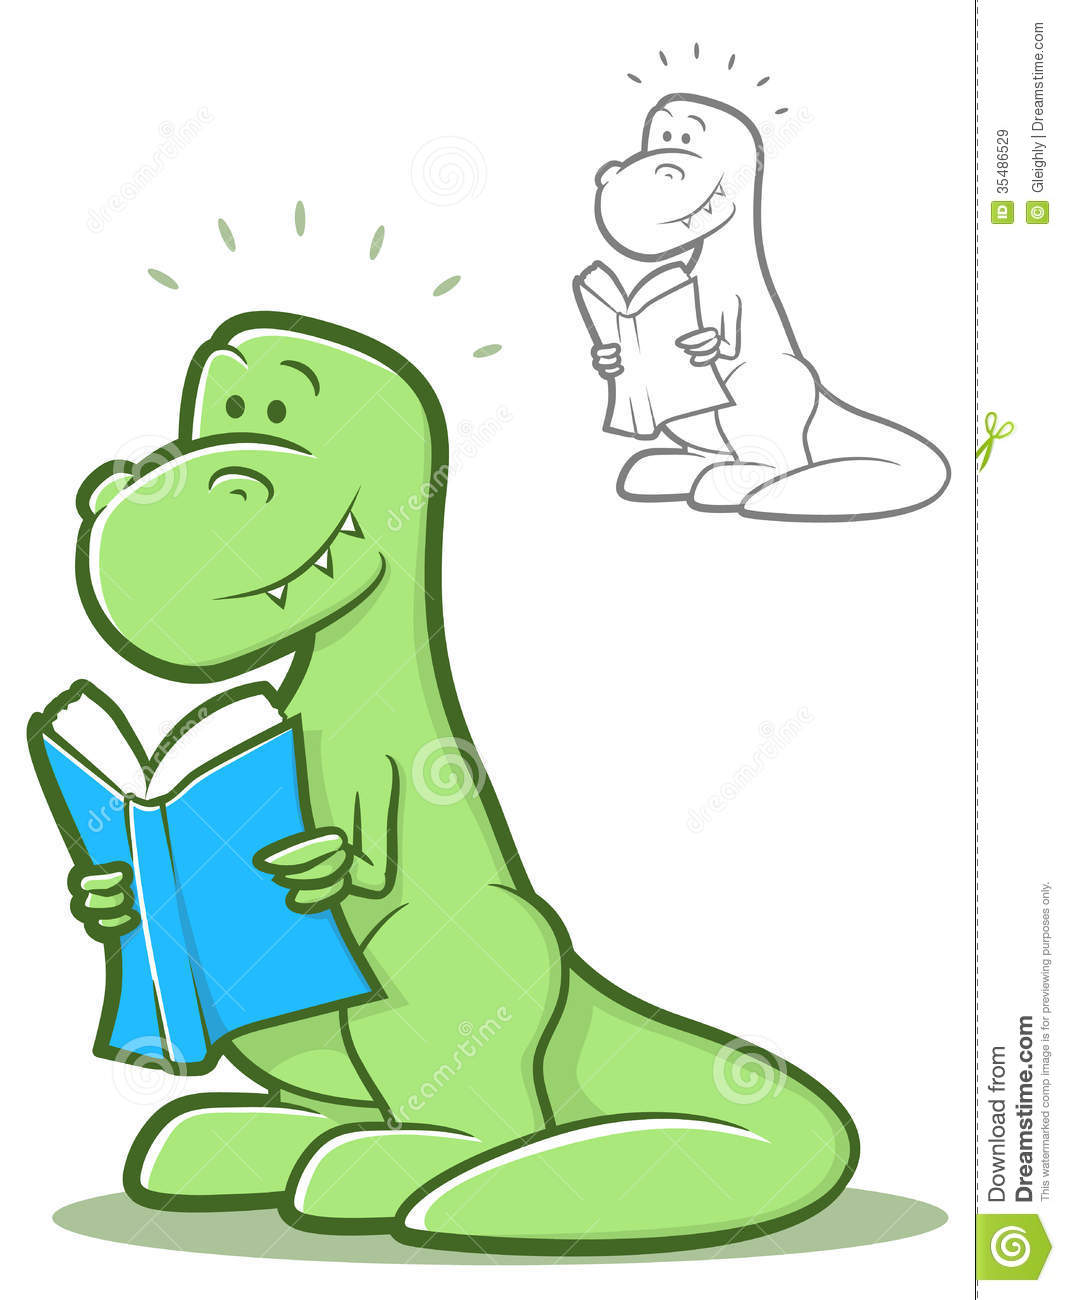 Cartoon Dinosaur Holding A Book And Smiling 